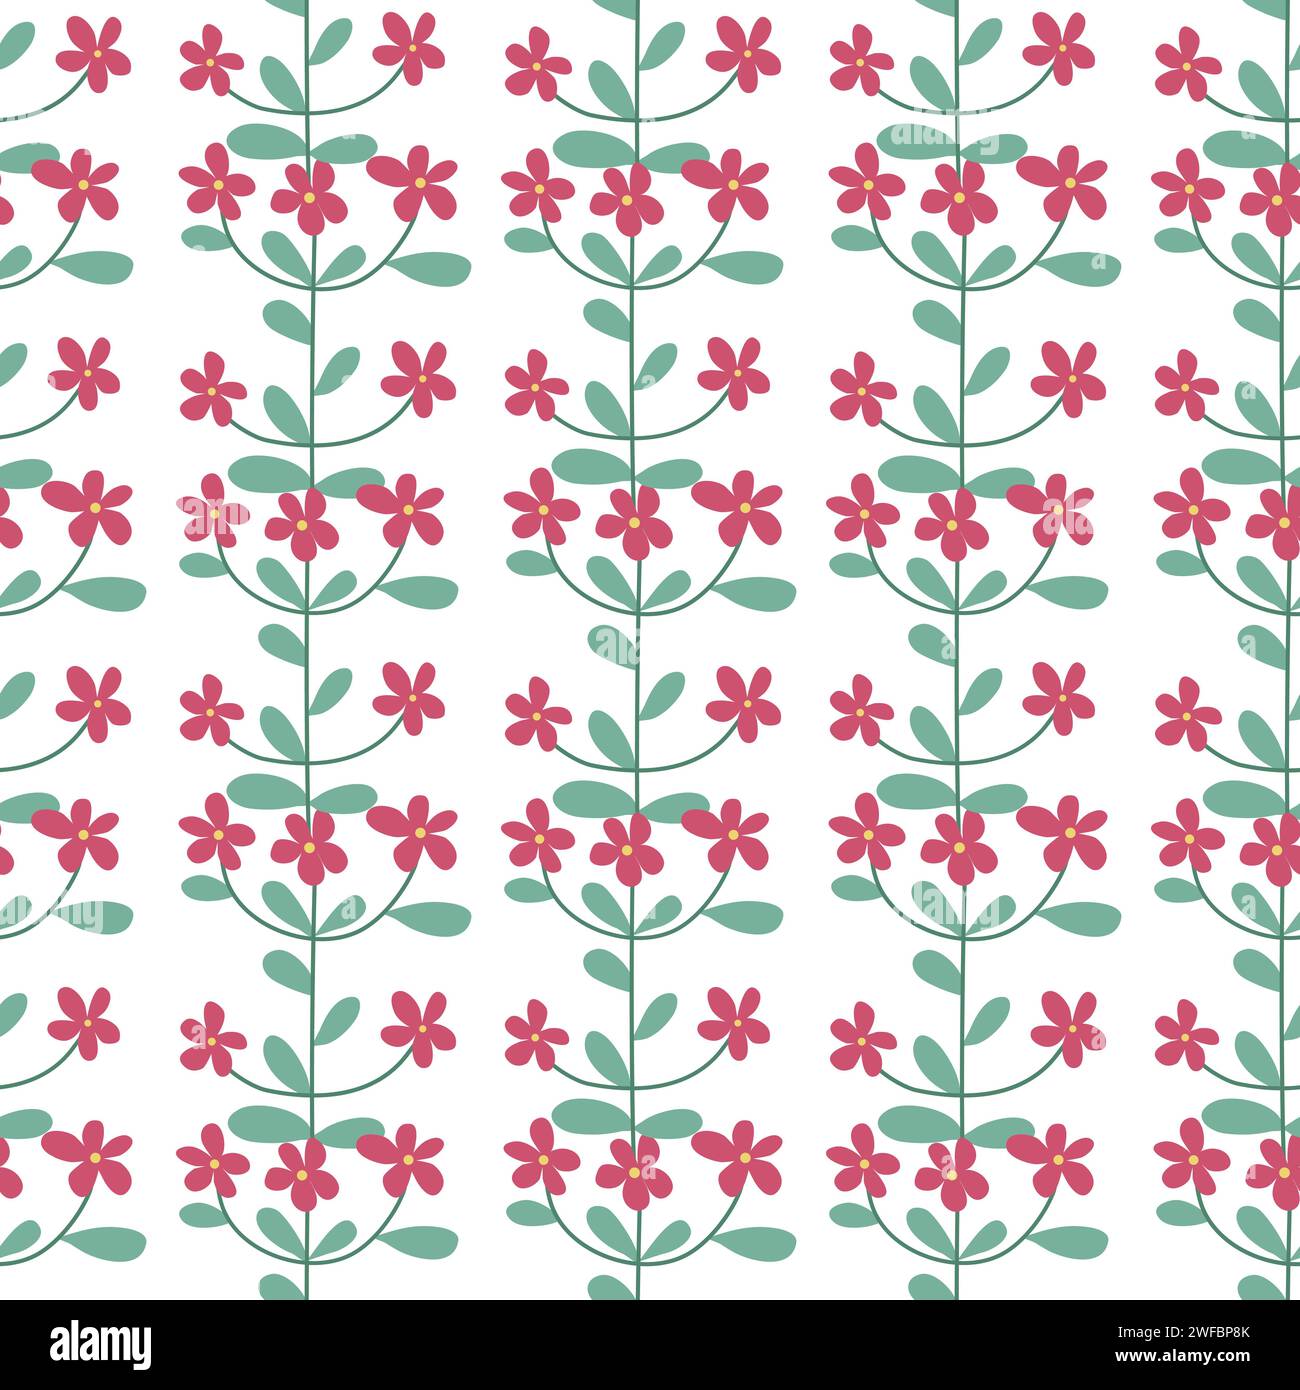 Spring flowers and herbs print. Blooming spring seamless pattern. Cute flowers and foliage background. Hand drawn floral ornament for textile, paper Stock Vector